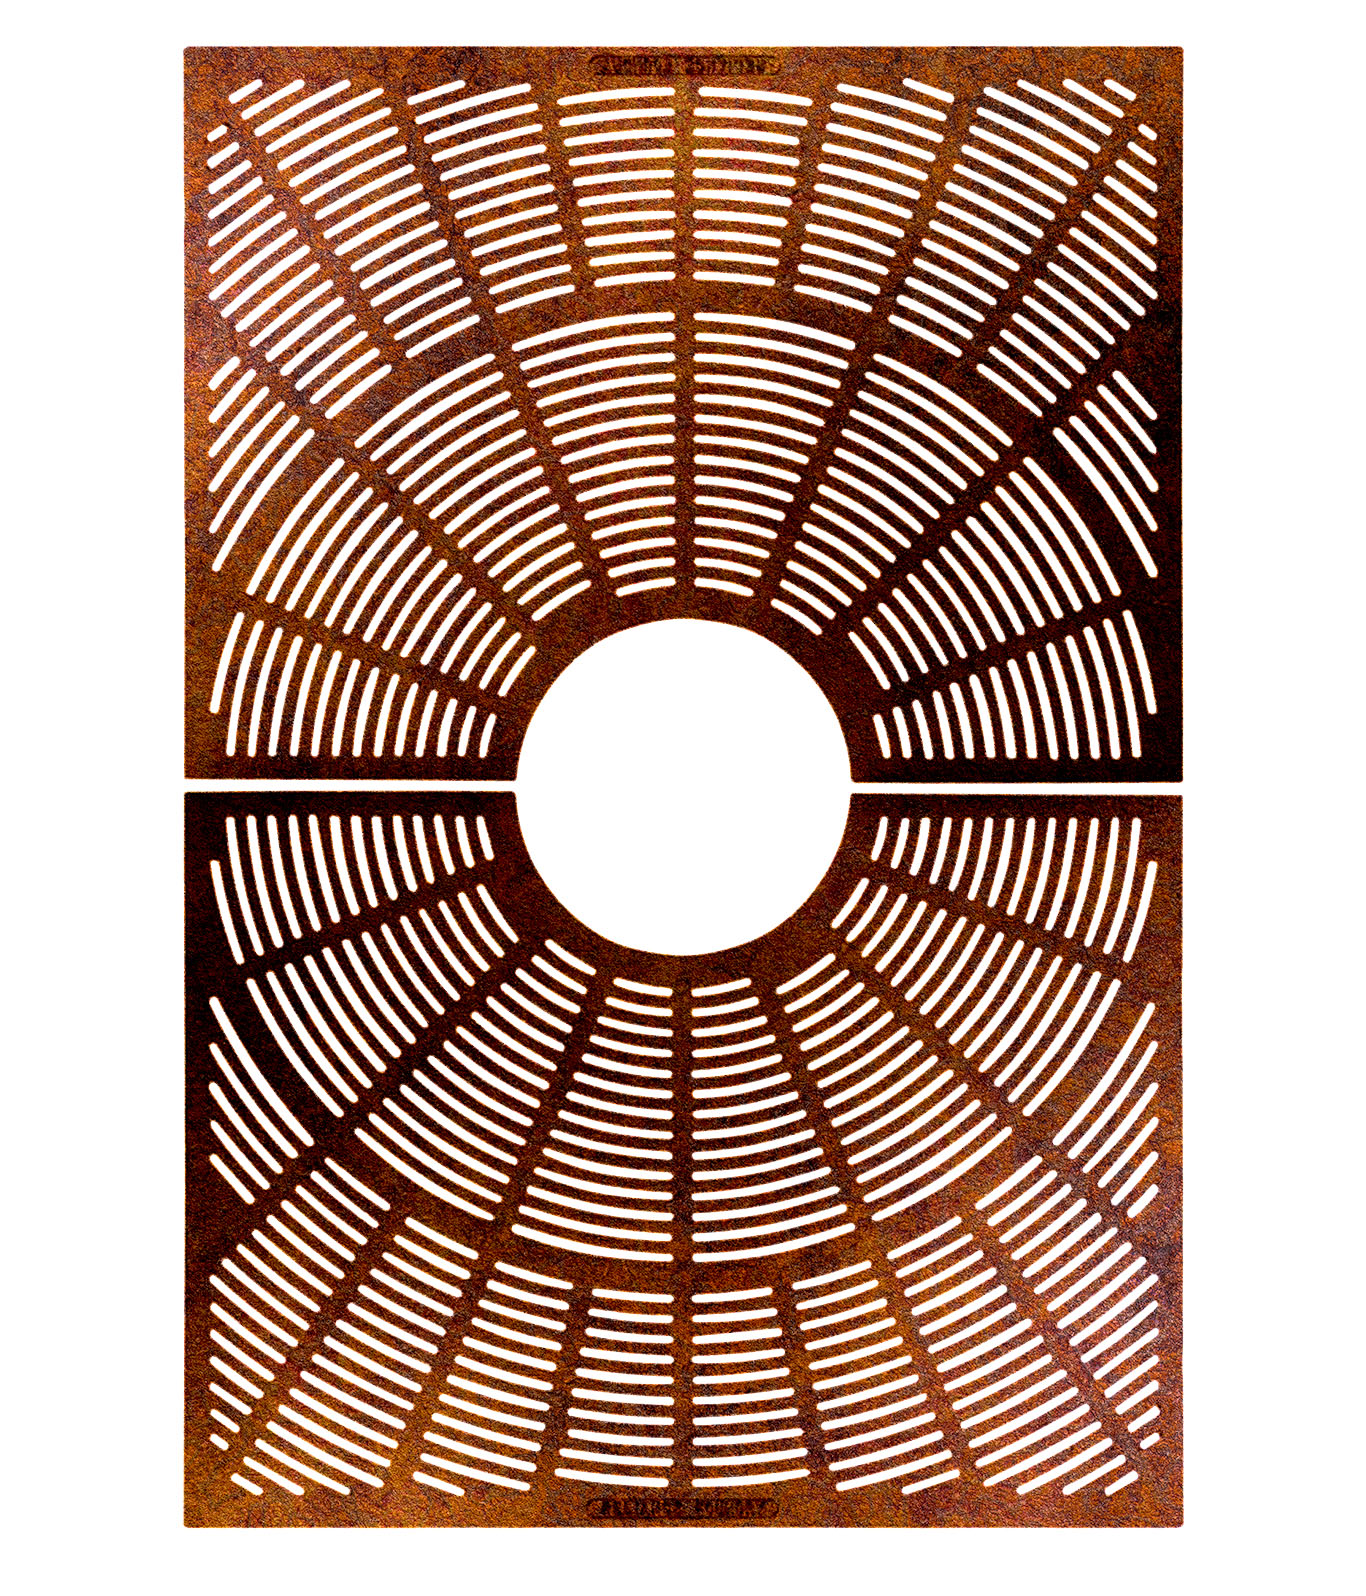 R-8811 Boulevard tree grate measuring 48 x 72 inches